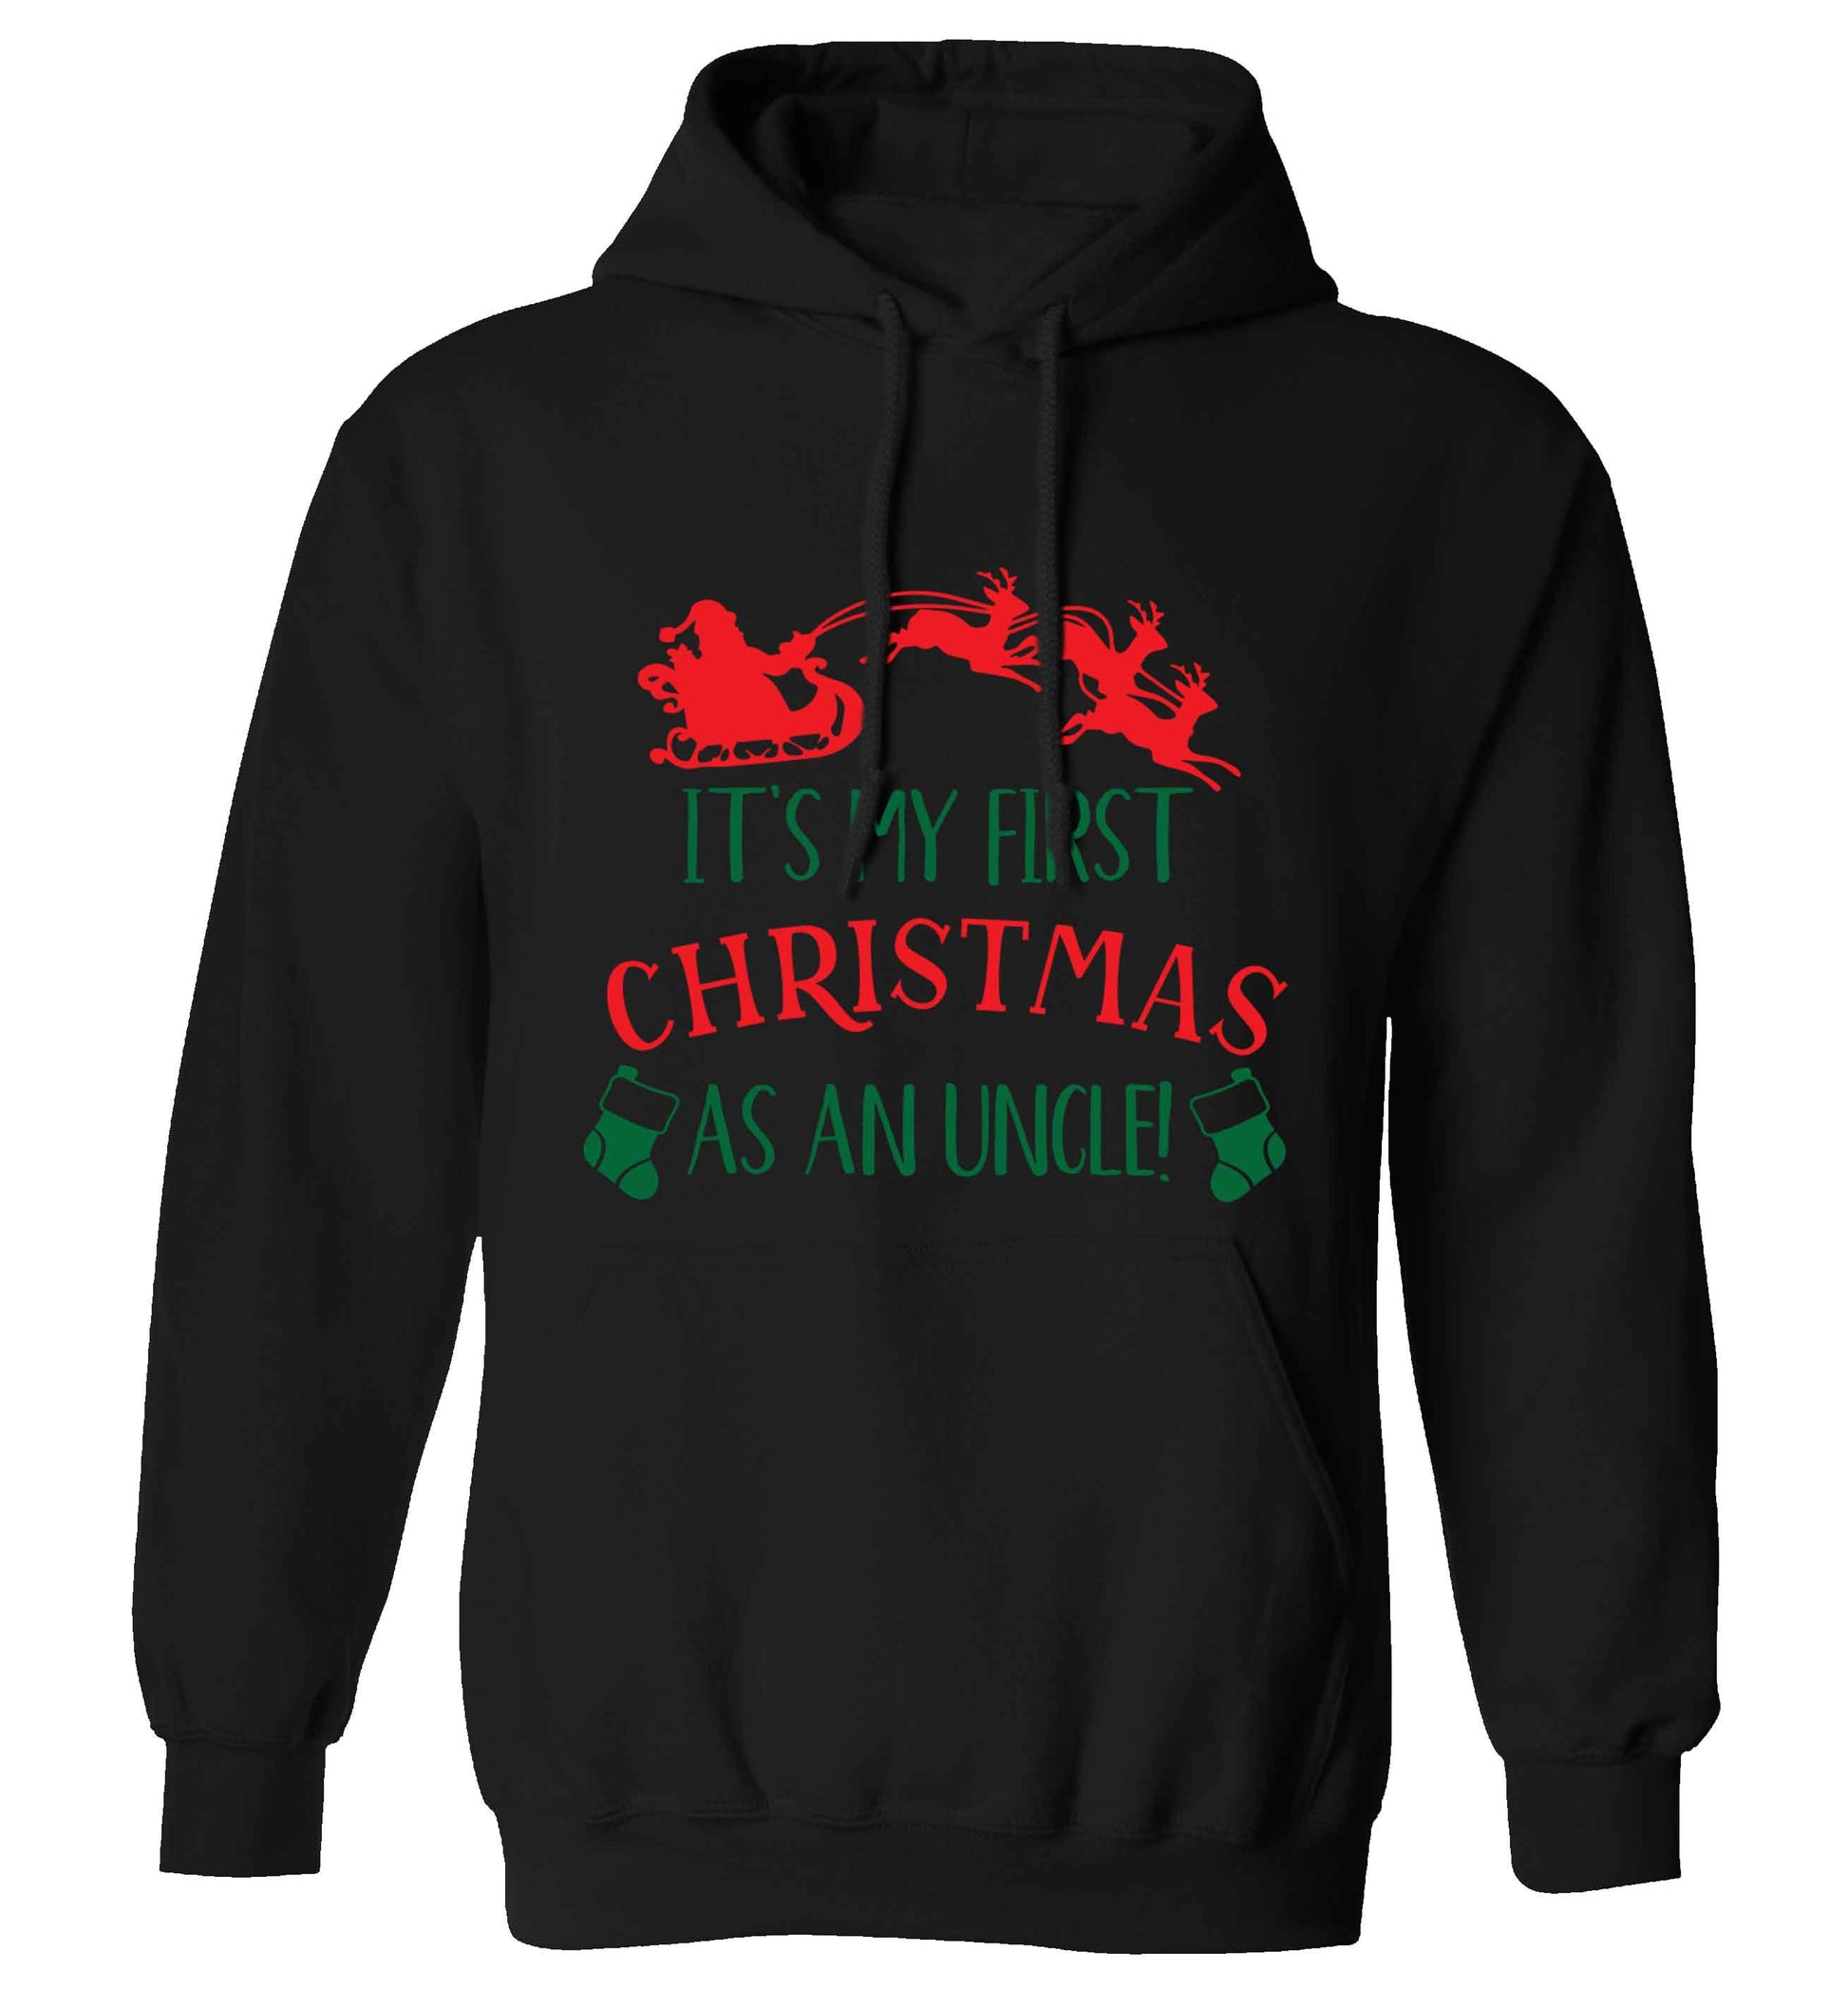 It's my first Christmas as an uncle! adults unisex black hoodie 2XL